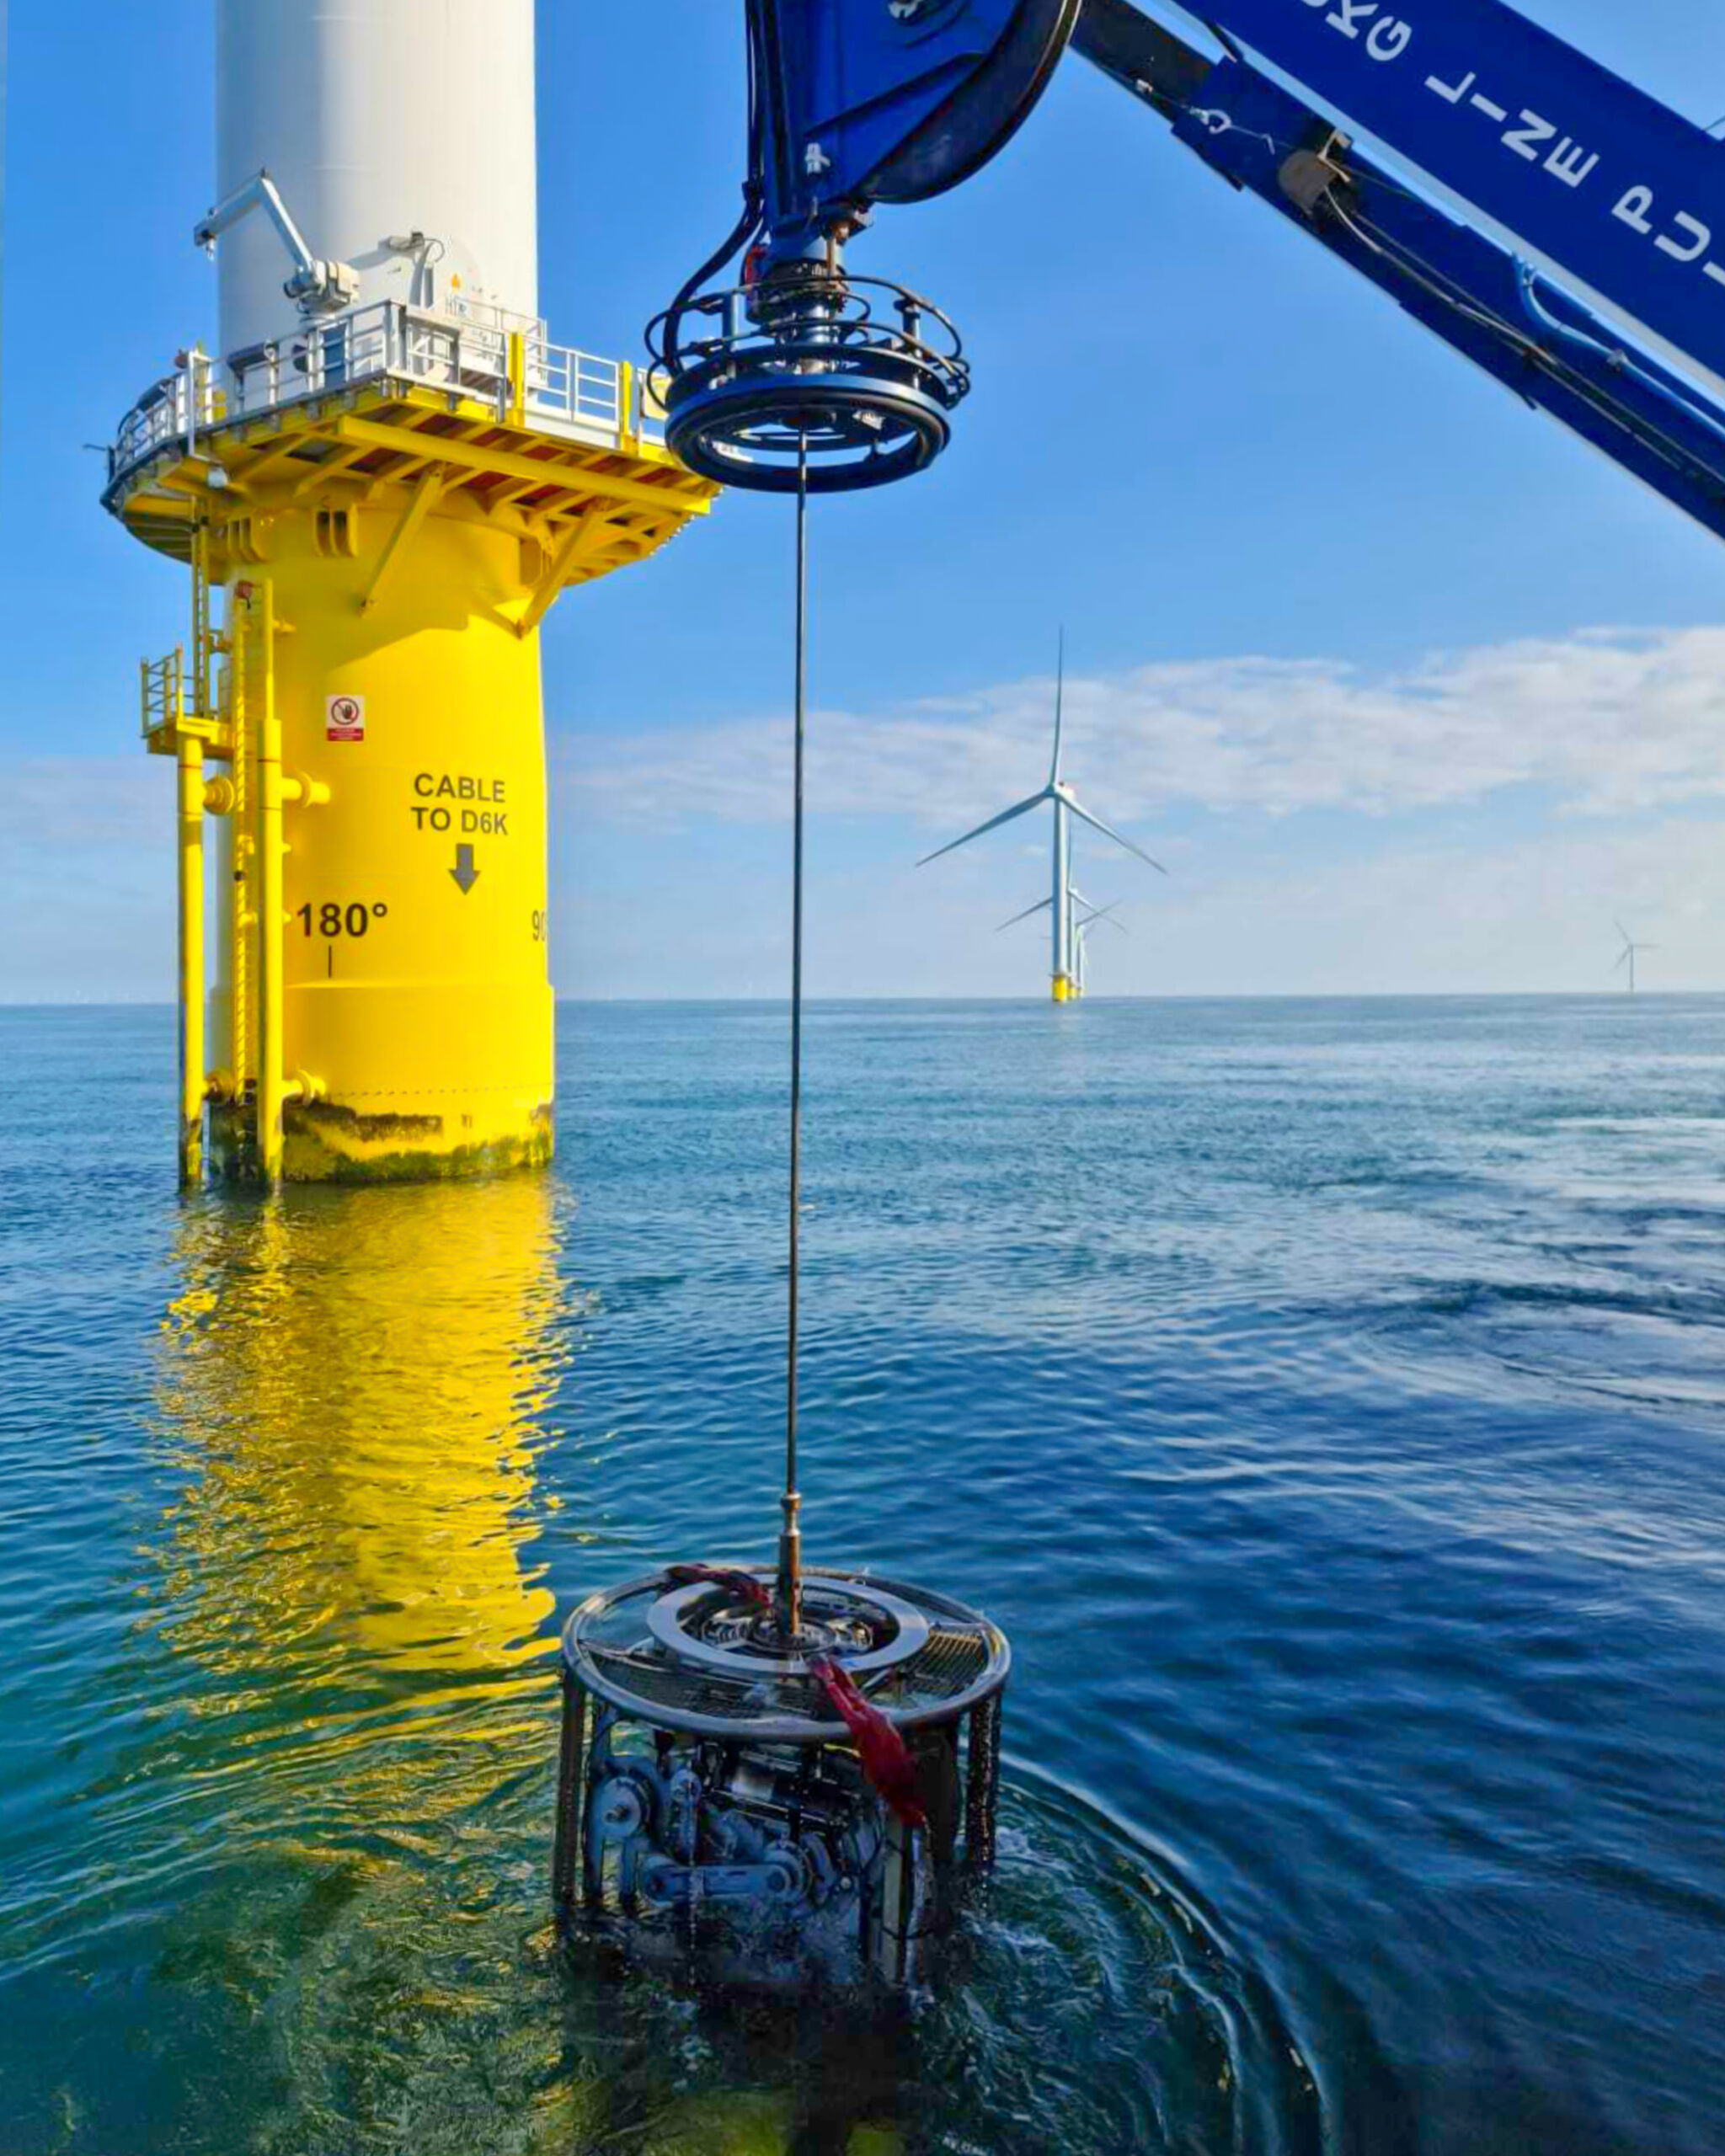 MEMBER NEWS: Rovco awarded contract at Galloper Offshore Wind Farm